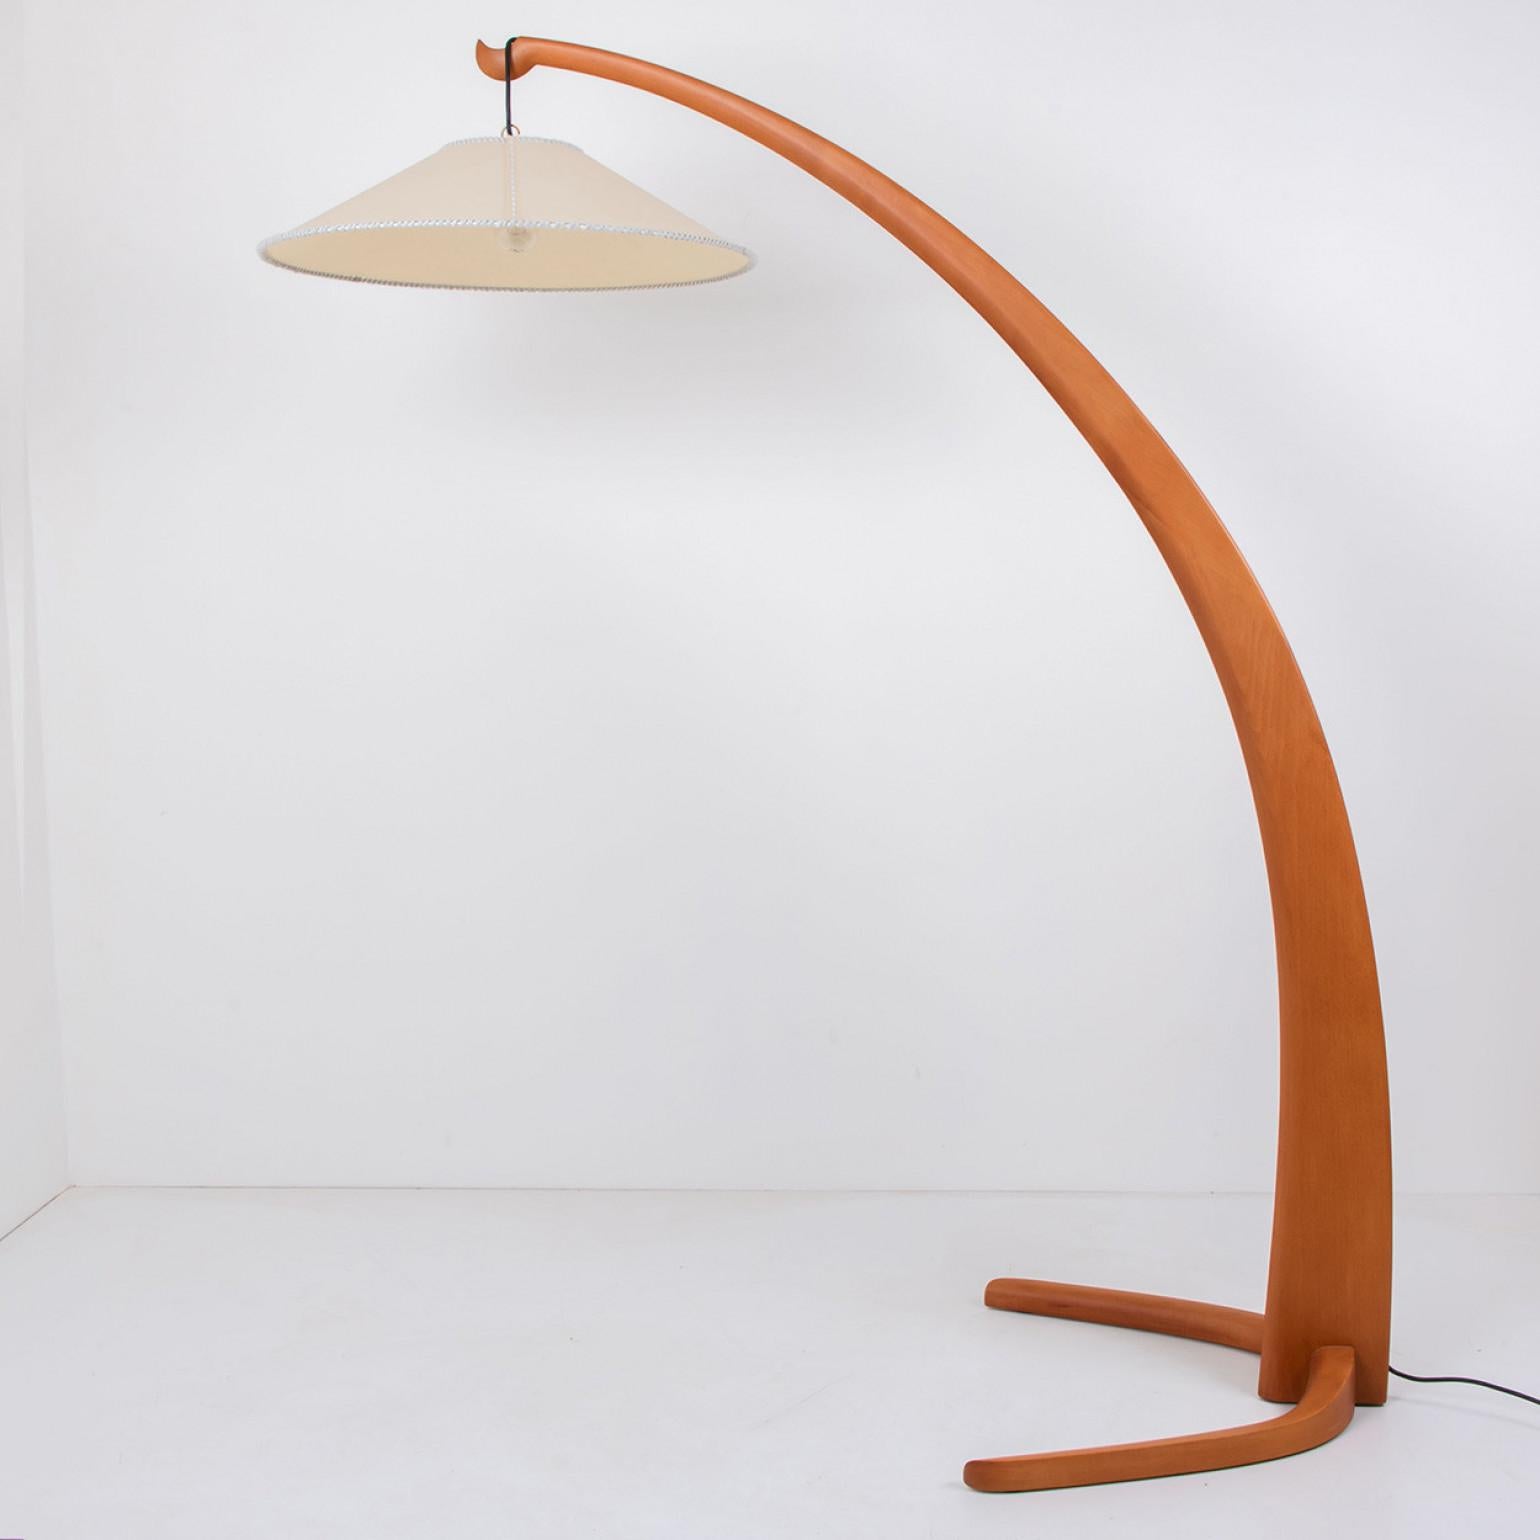 Large organic shaped floor lamp by Studio B.B.P.R; Gian Luigi Banfi, Ludovico Barbiano di Belgiojoso, Enrico Peressutti and Nathan Rogers.
Designed and manufactured in Italy around 1950.
The base is made of beech wood. The textile shade hangs on the